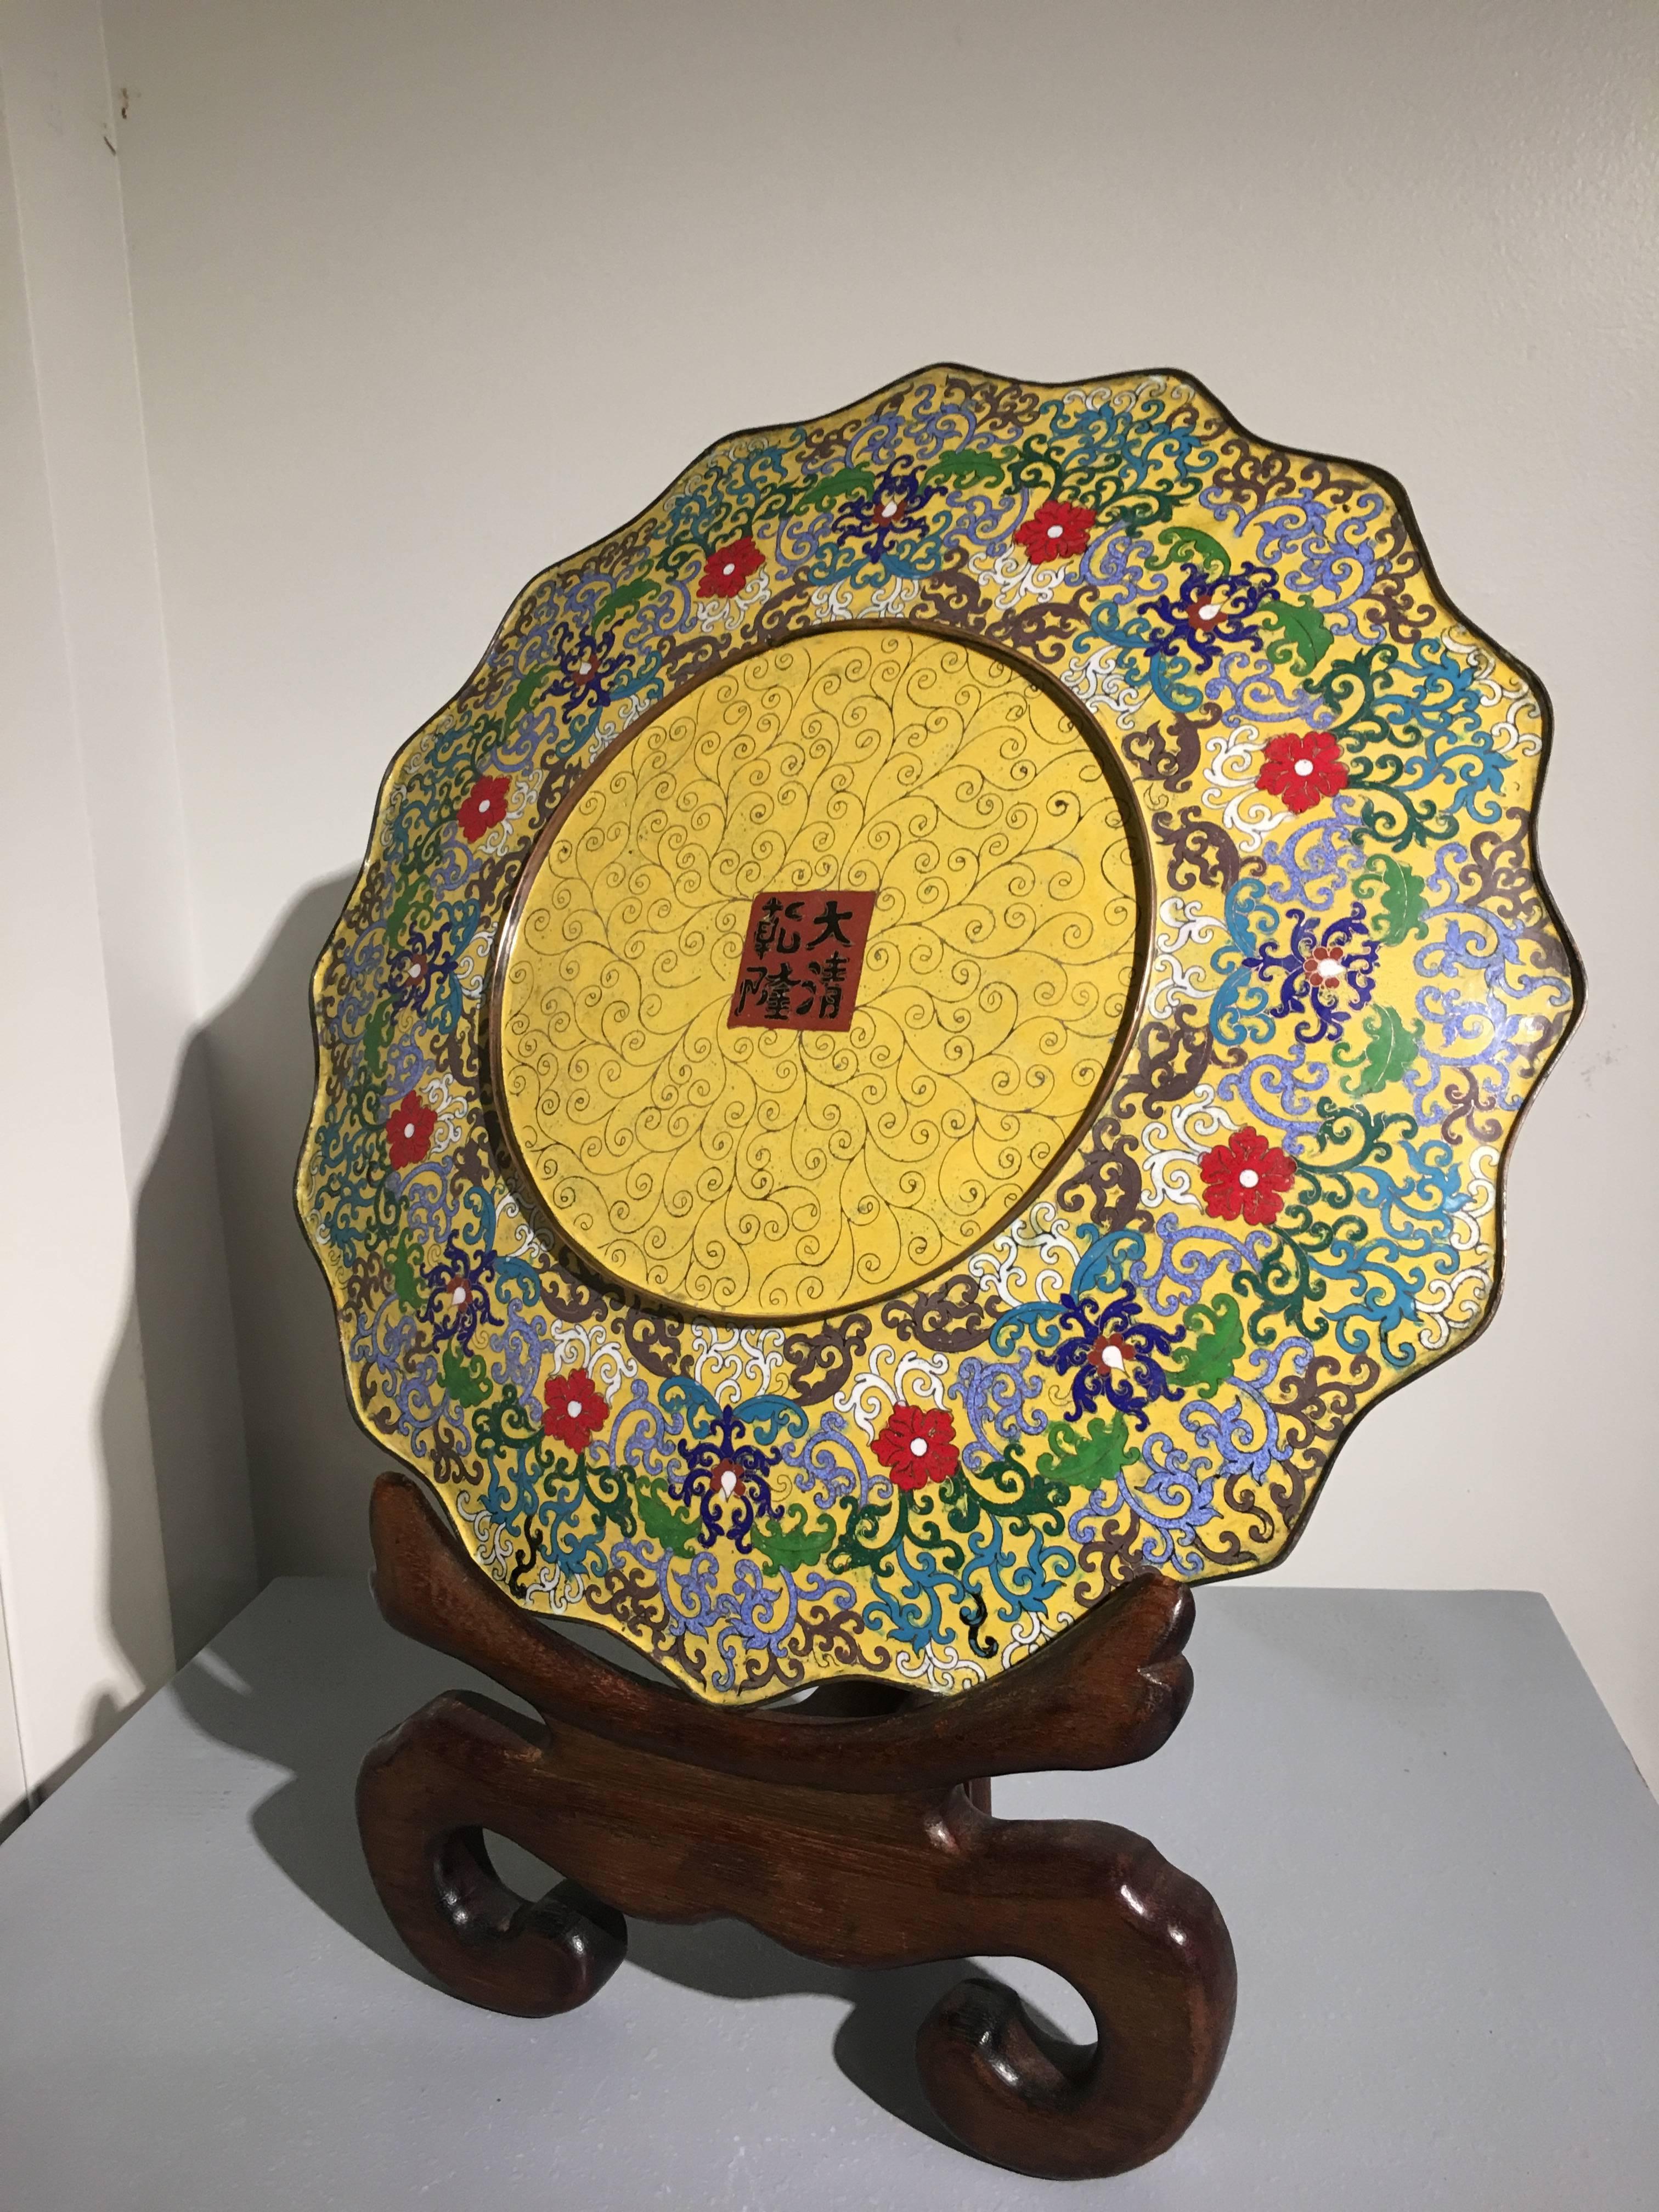 Hollywood Regency Large Chinese Yellow Cloisonné Charger, Republic Period, circa 1930s